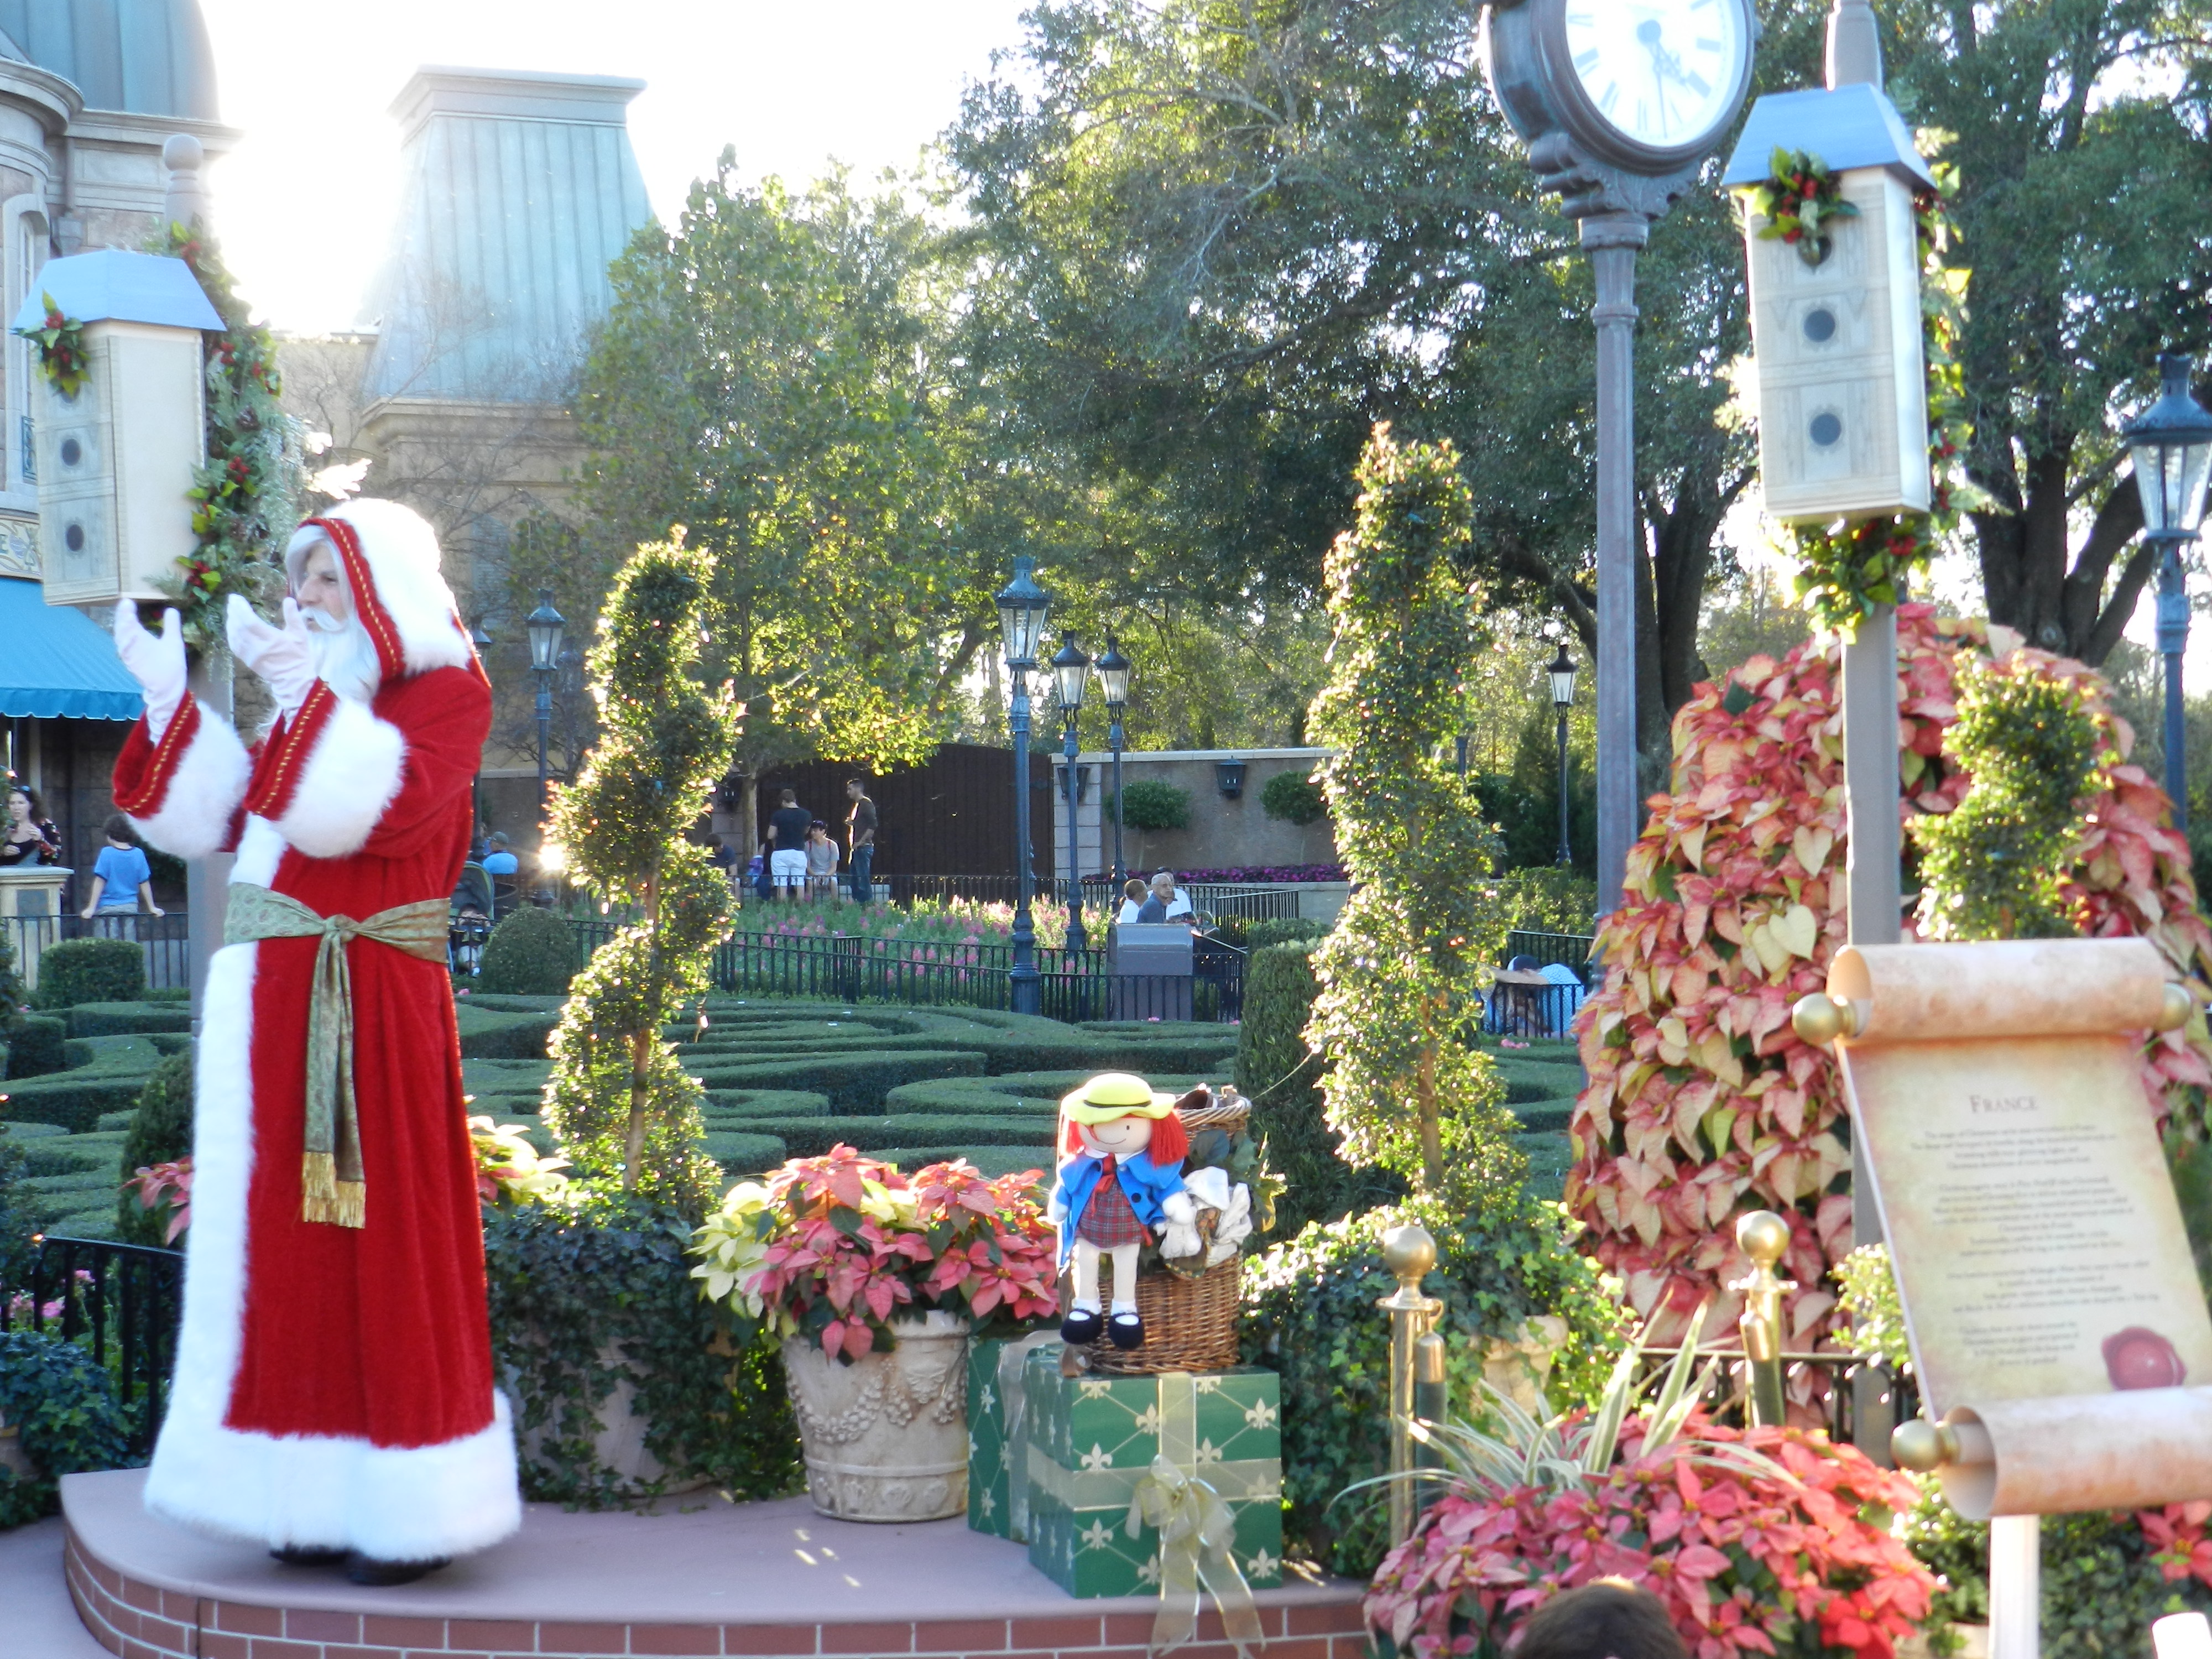 Epcot Festival of the Holidays with Pere Noel in France giving story.